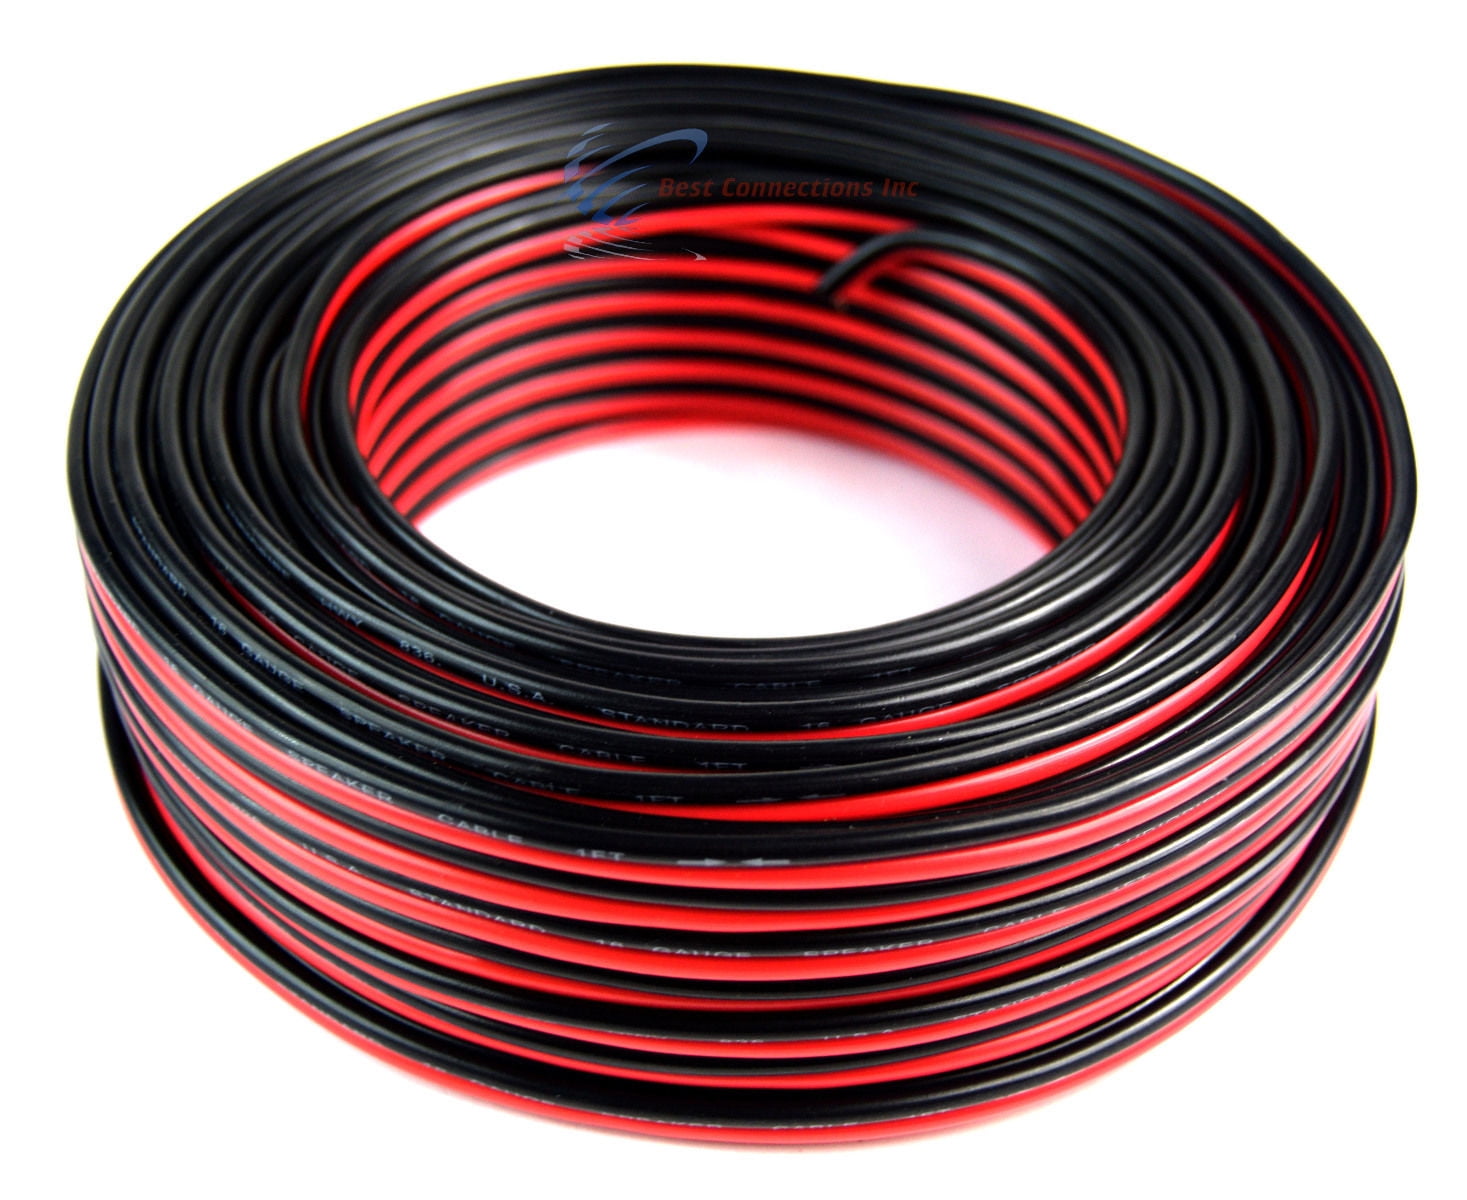 100FT 18-GA Gauge Red Black 2 Conductor Speaker Wire Audio Cable 